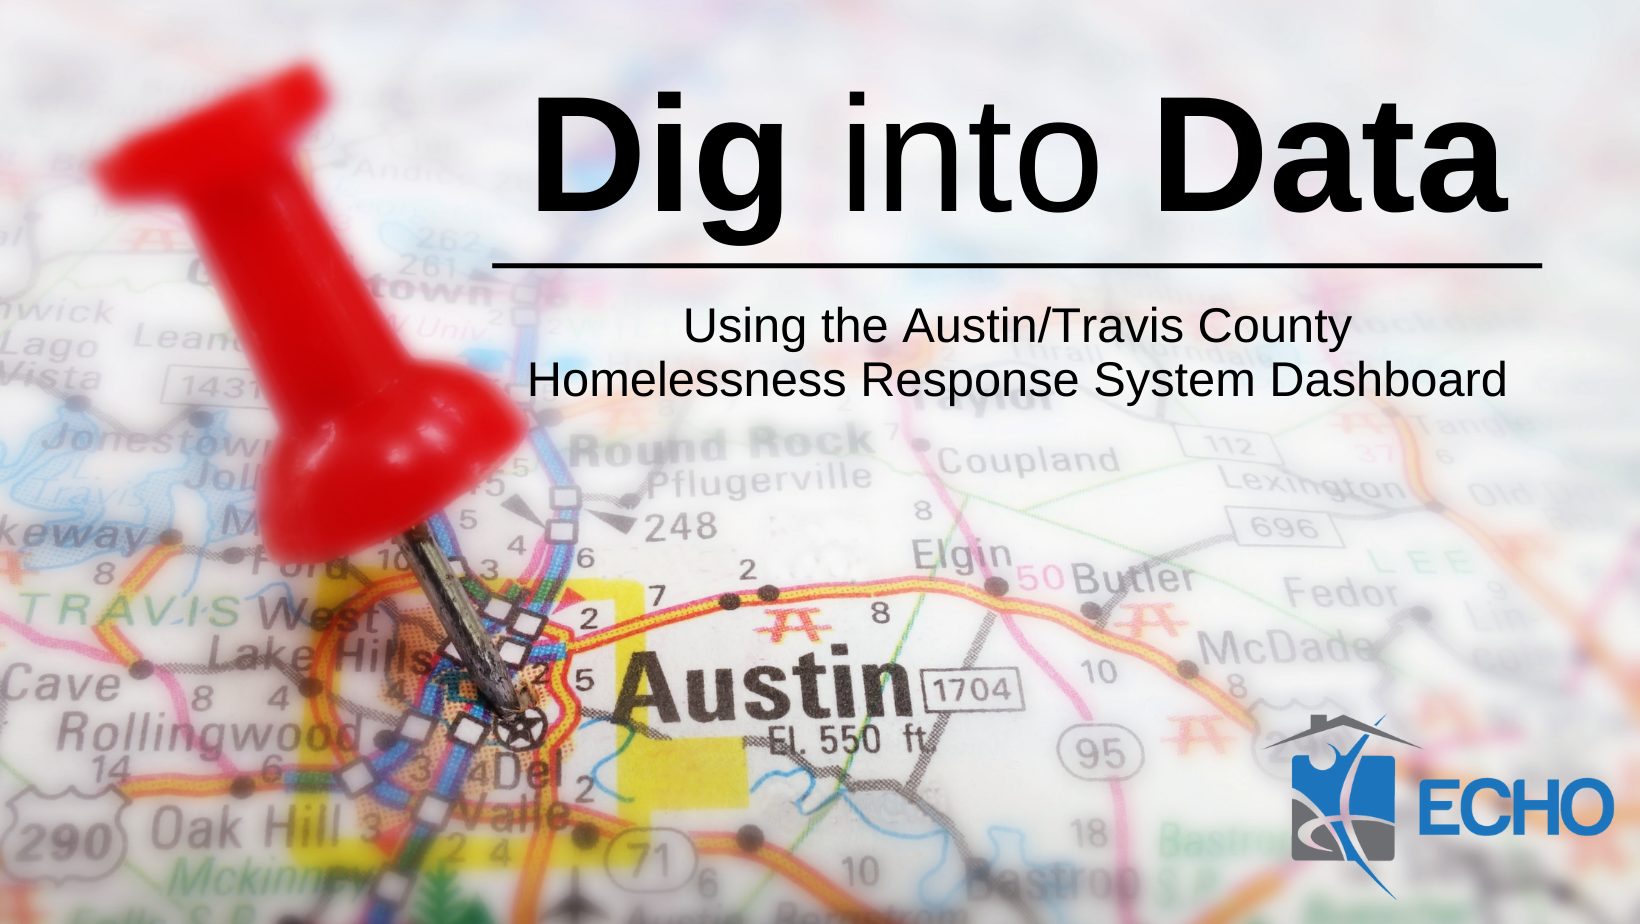 Image shows a roadmap zoomed into Austin with the words "Dig into Data: Using the Austin/Travis County Homelessness Response System Dashboard"